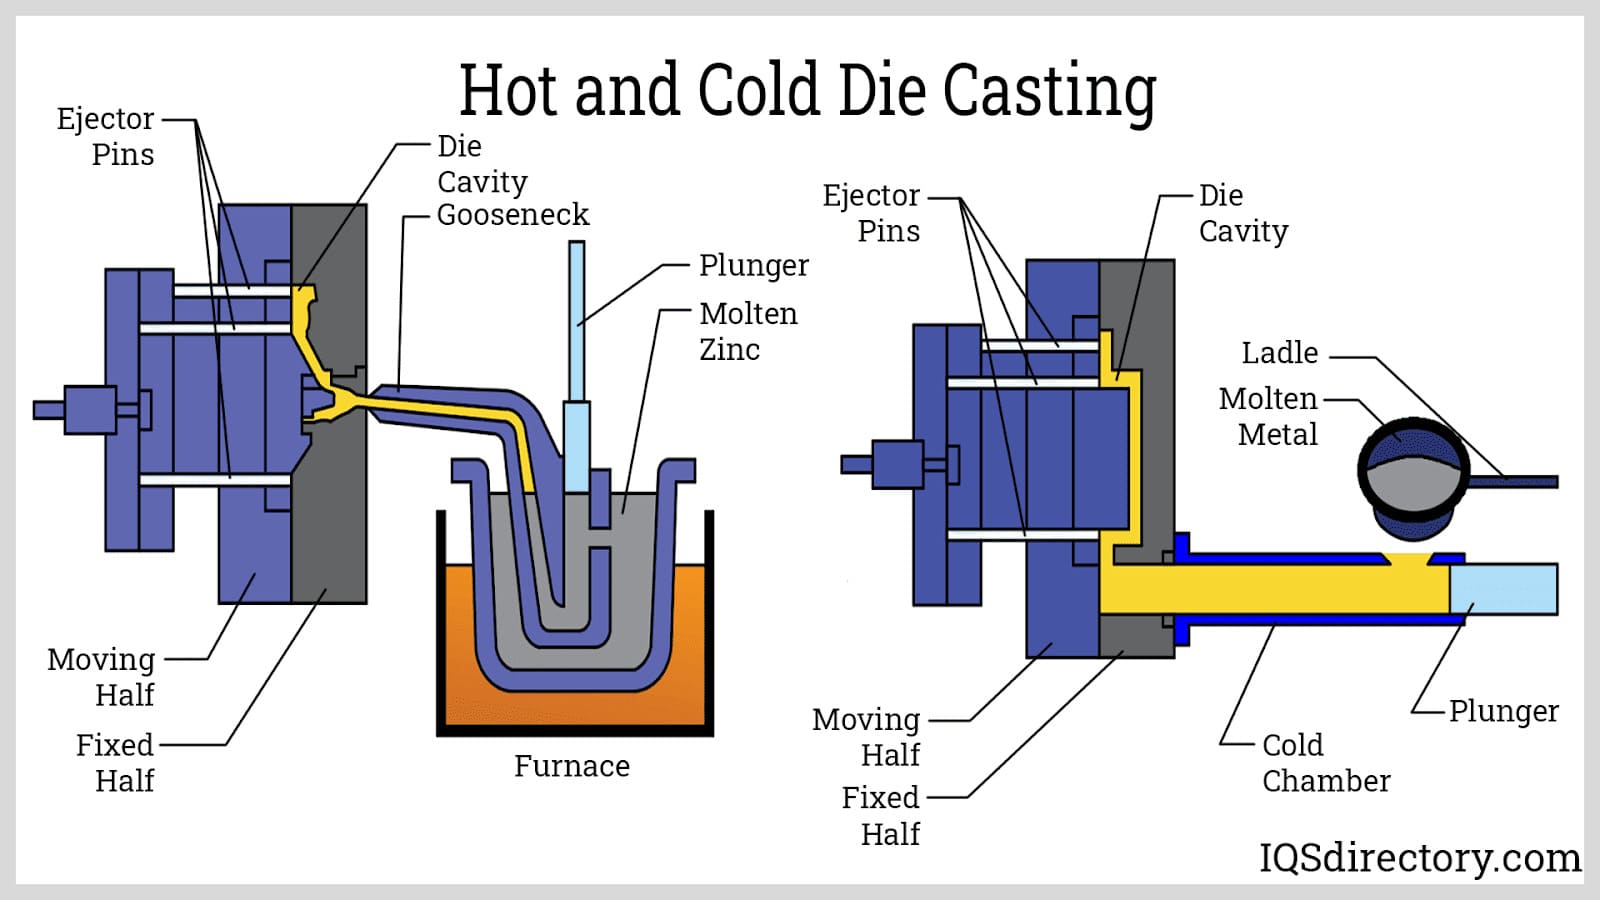 Hot and Cold Die Casting